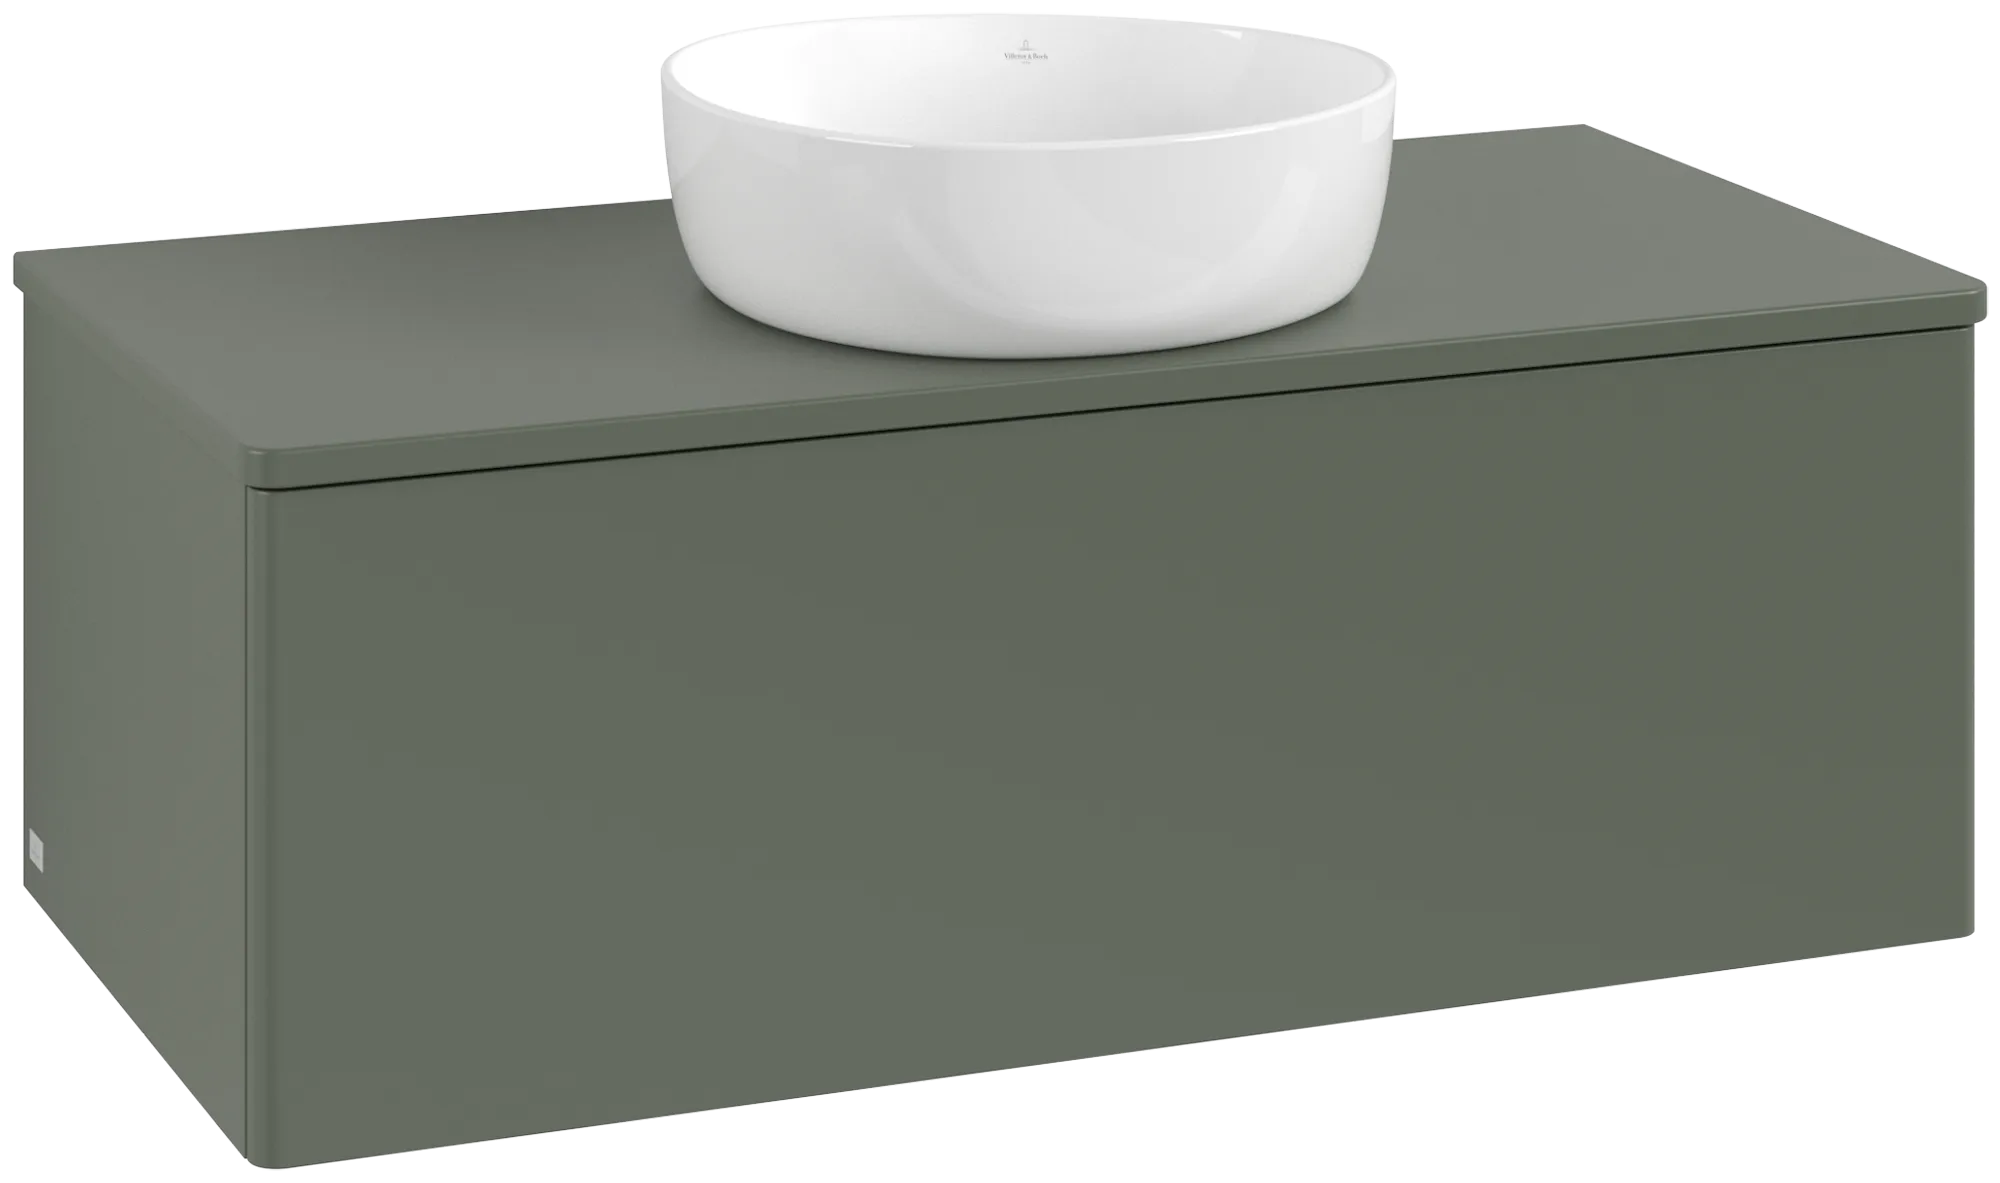 Picture of VILLEROY BOCH Antao Vanity unit, 1 pull-out compartment, 1000 x 360 x 500 mm, Front without structure, Leaf Green Matt Lacquer / Leaf Green Matt Lacquer #K31050HL